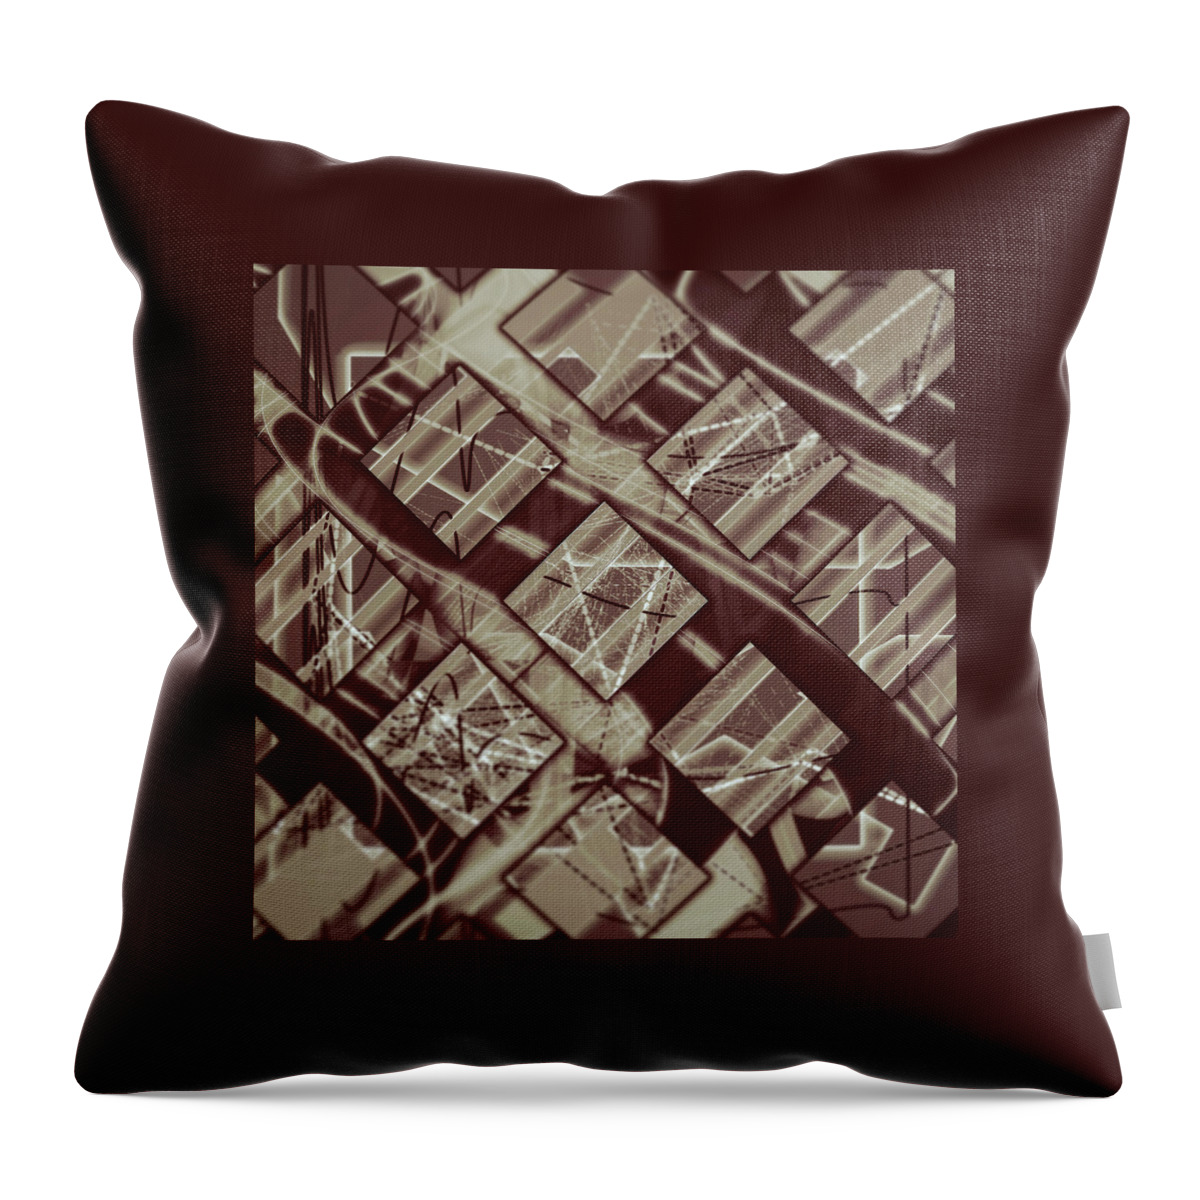 Abstract Throw Pillow featuring the digital art Pattern 57 #1 by Marko Sabotin